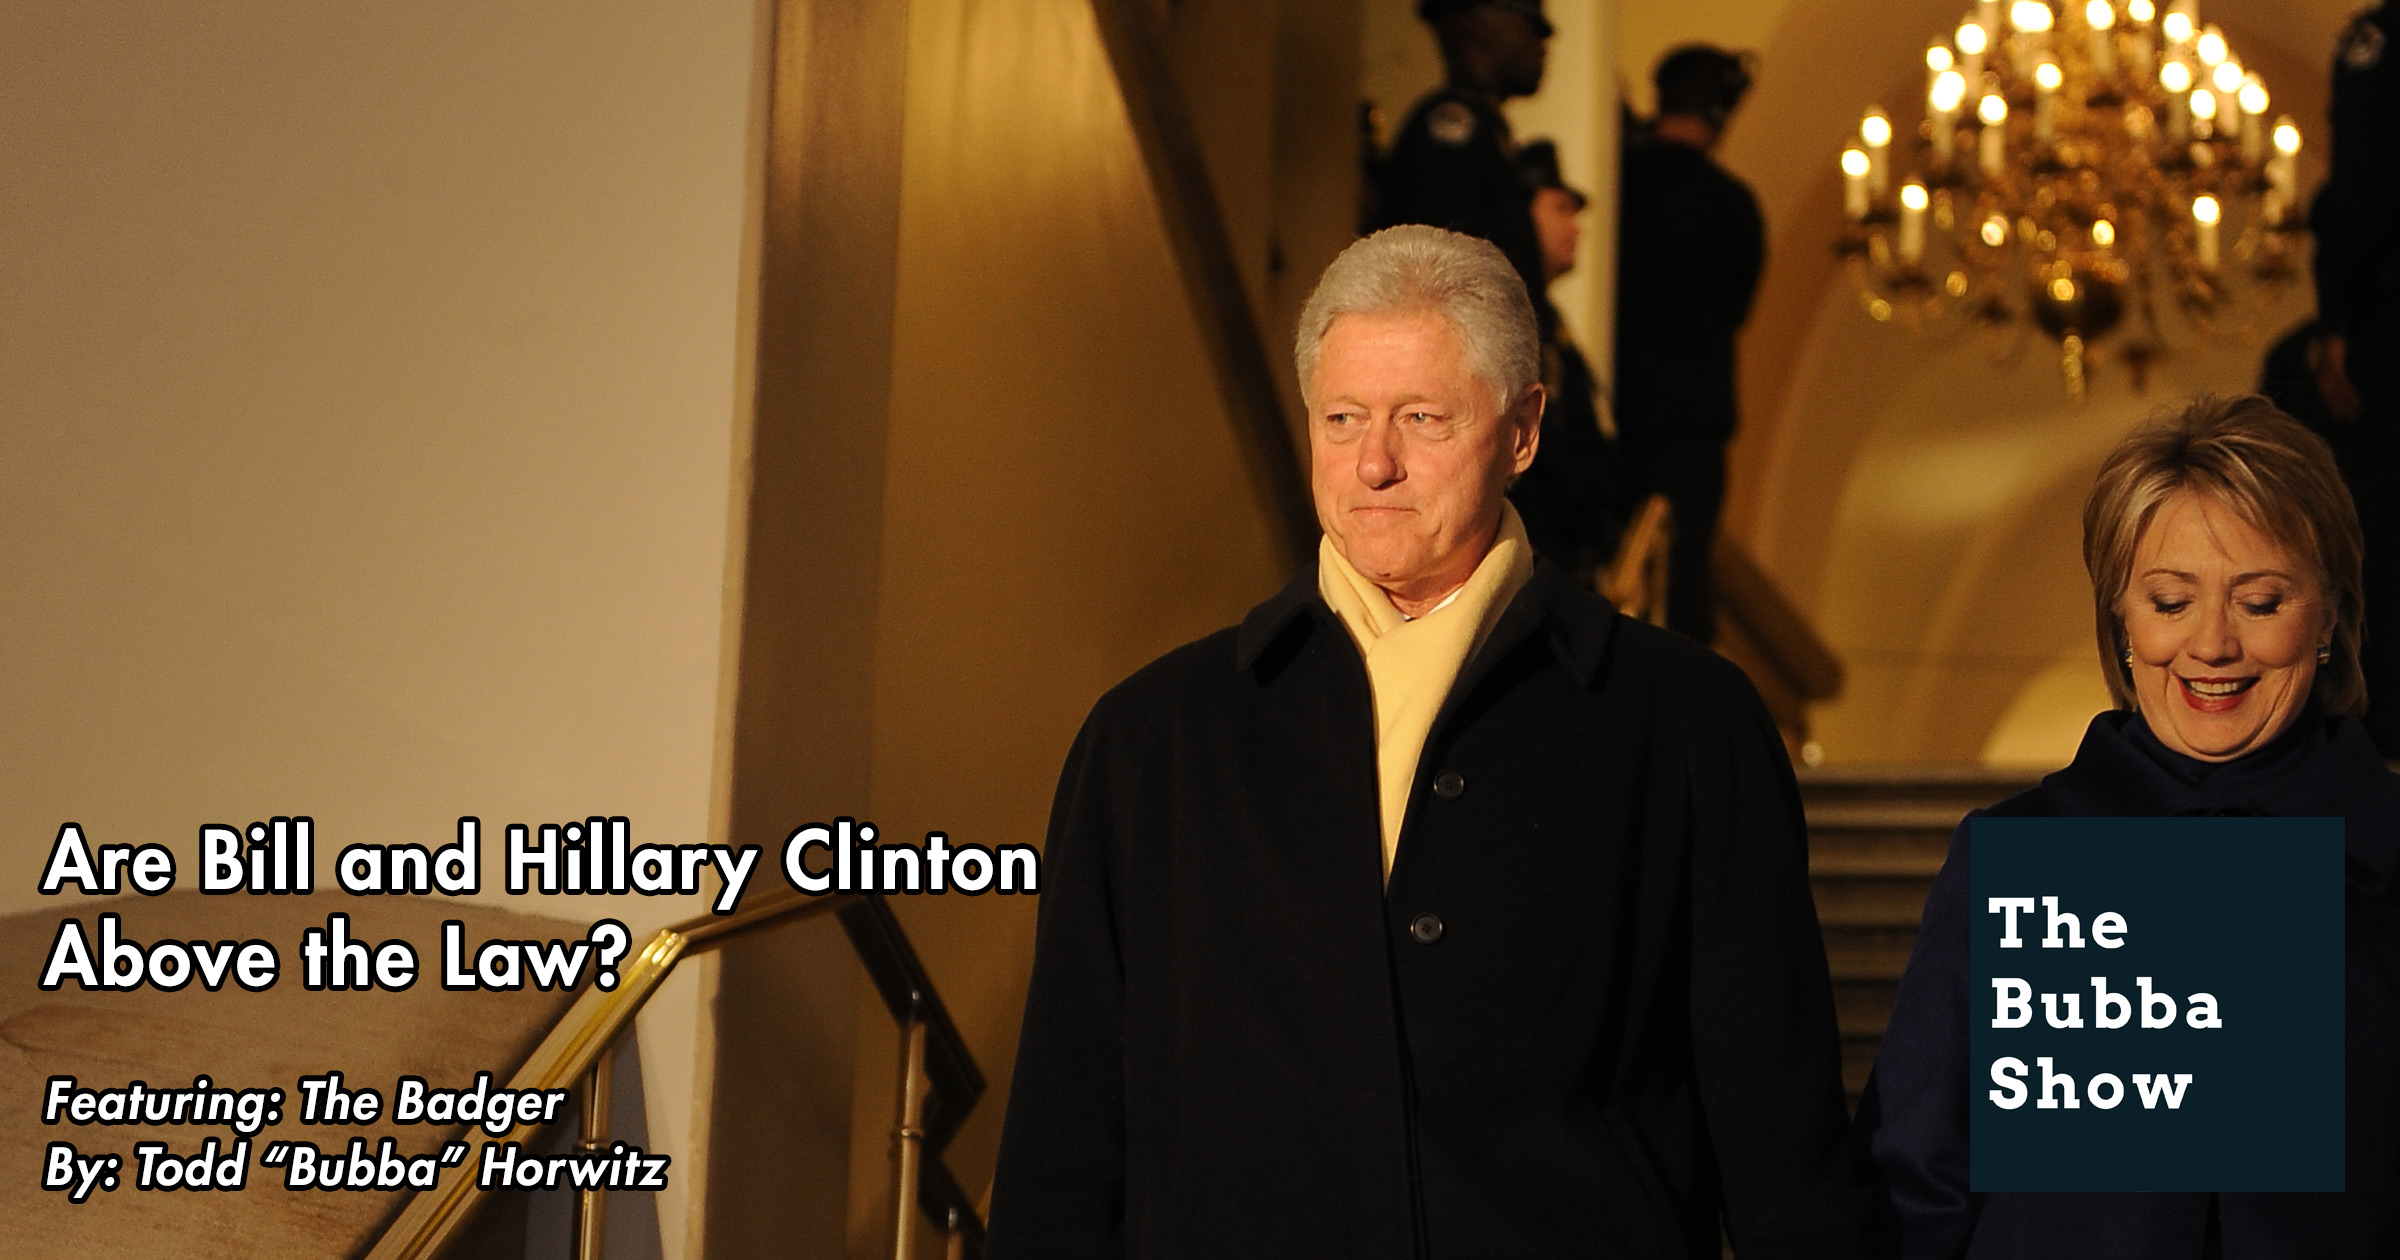 Bill and Hillary Clinton Above the Law?